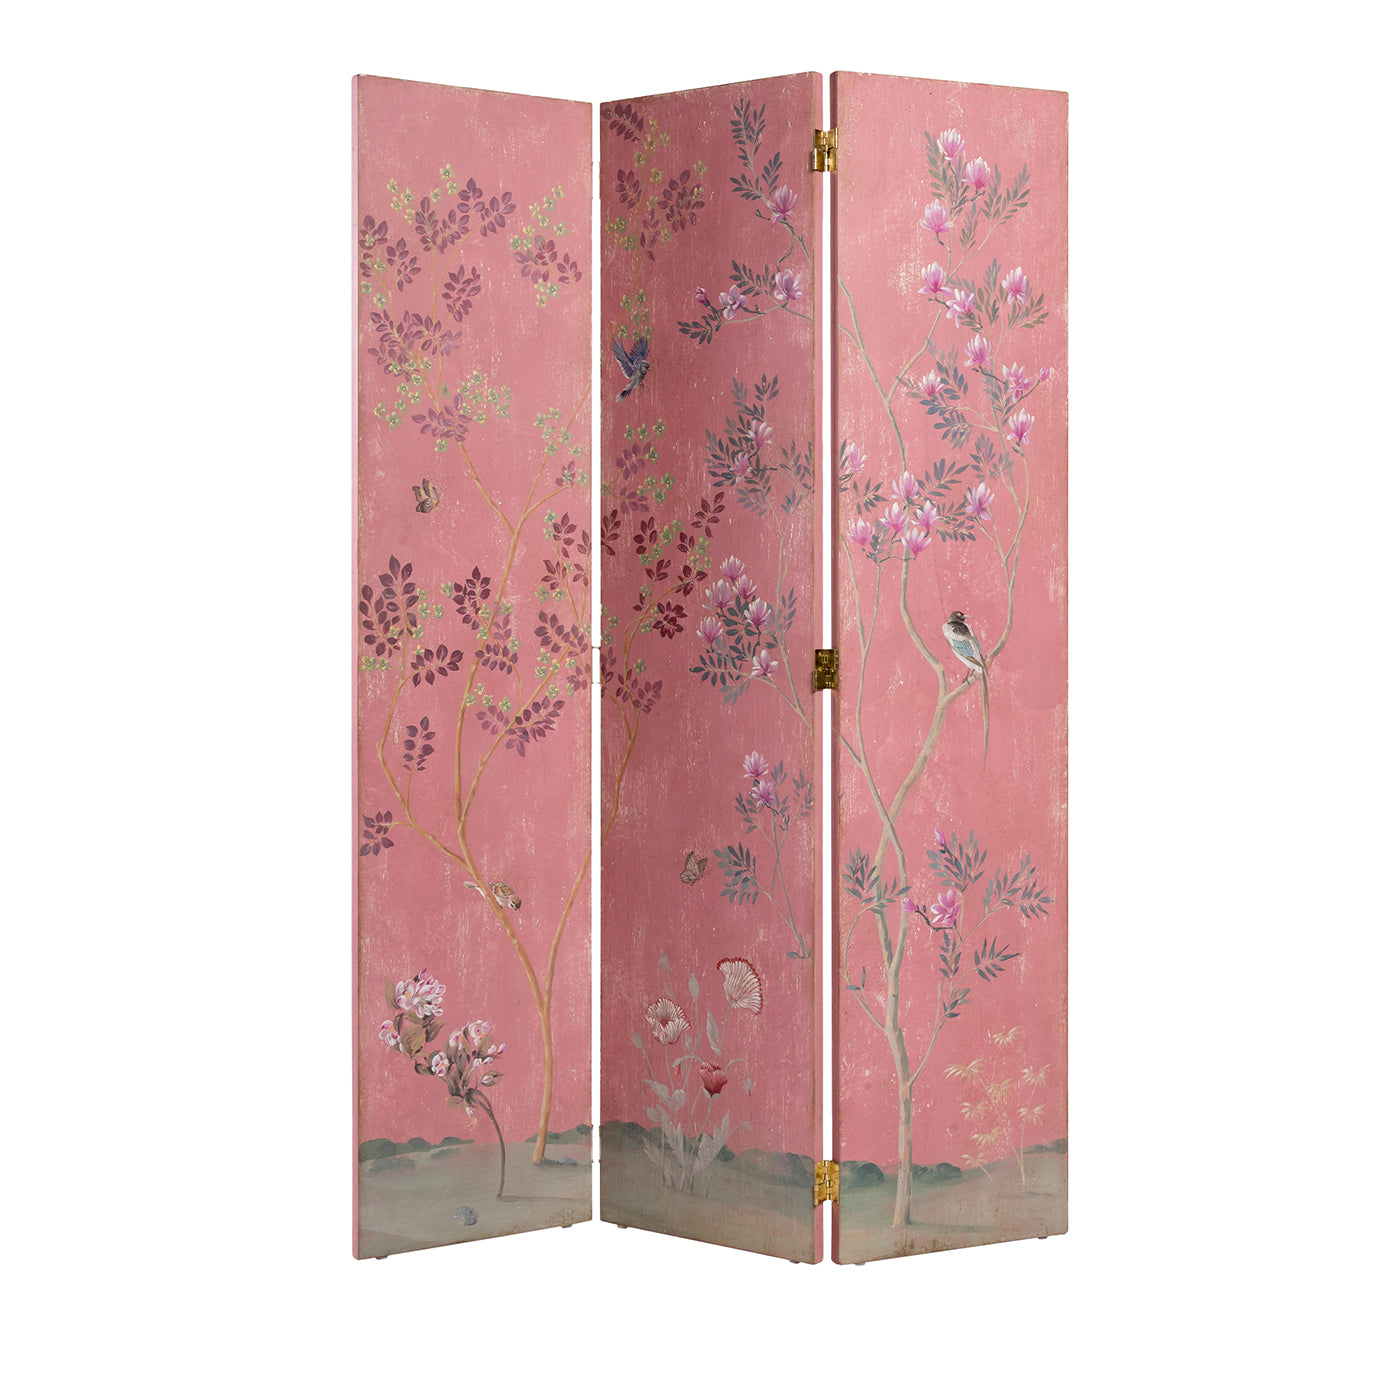 Otello Folding Screen with Floral Motifs - Main view